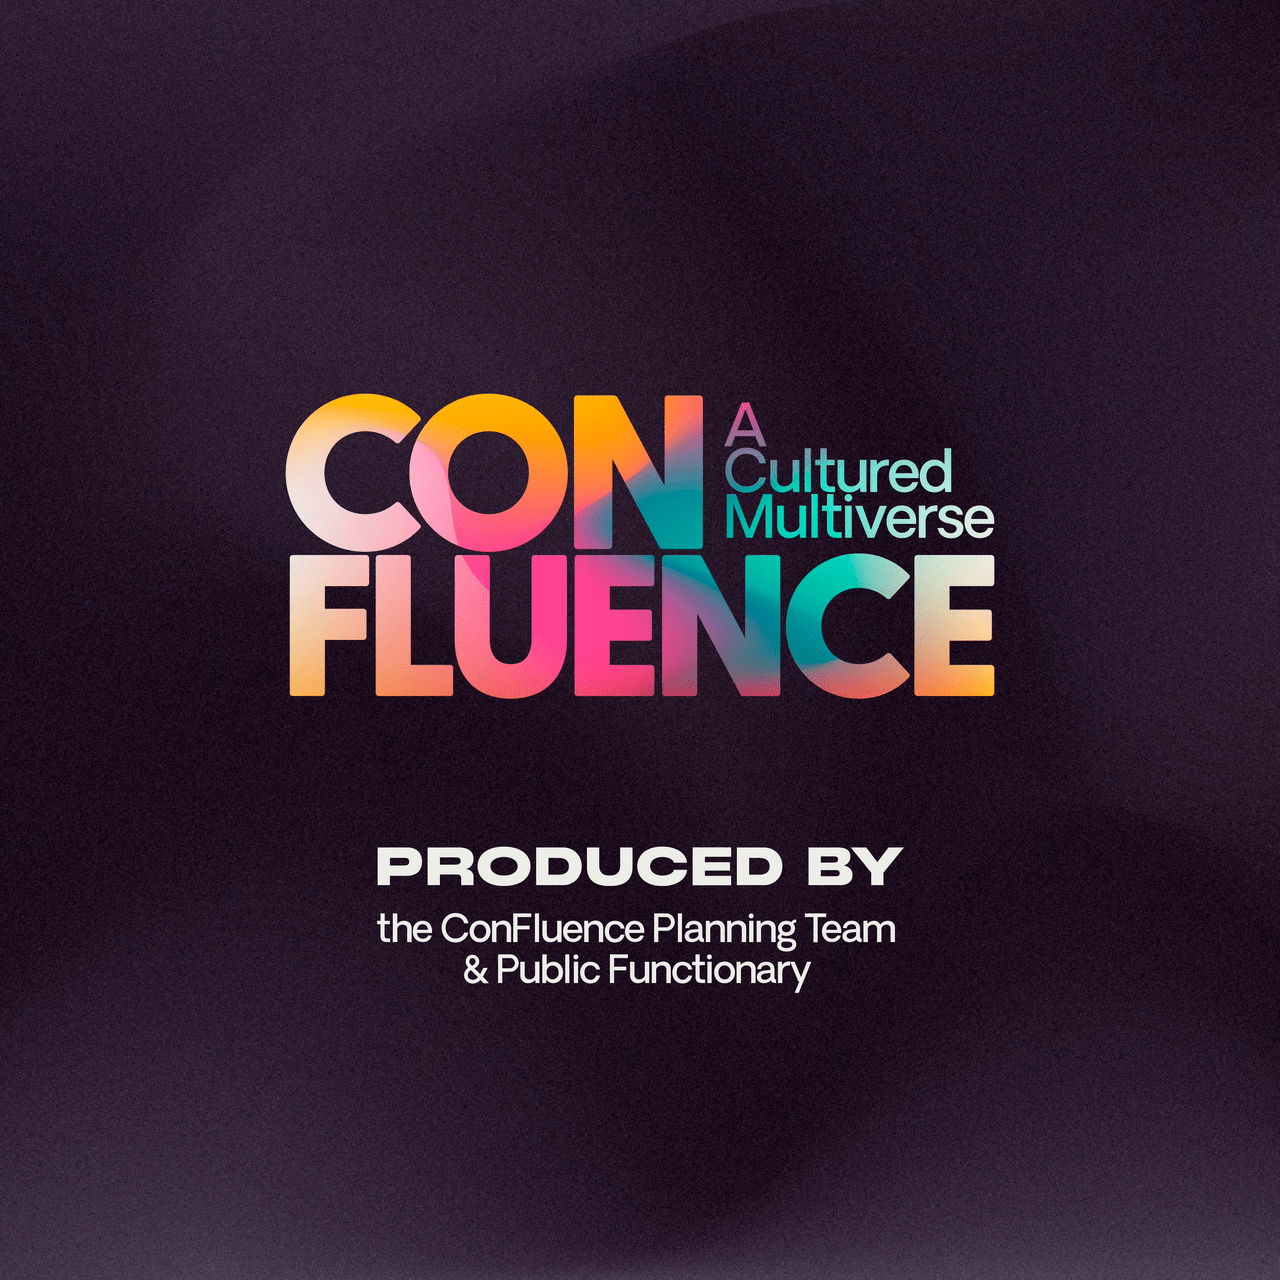 A teaser for the ConFluence event, with production credits.